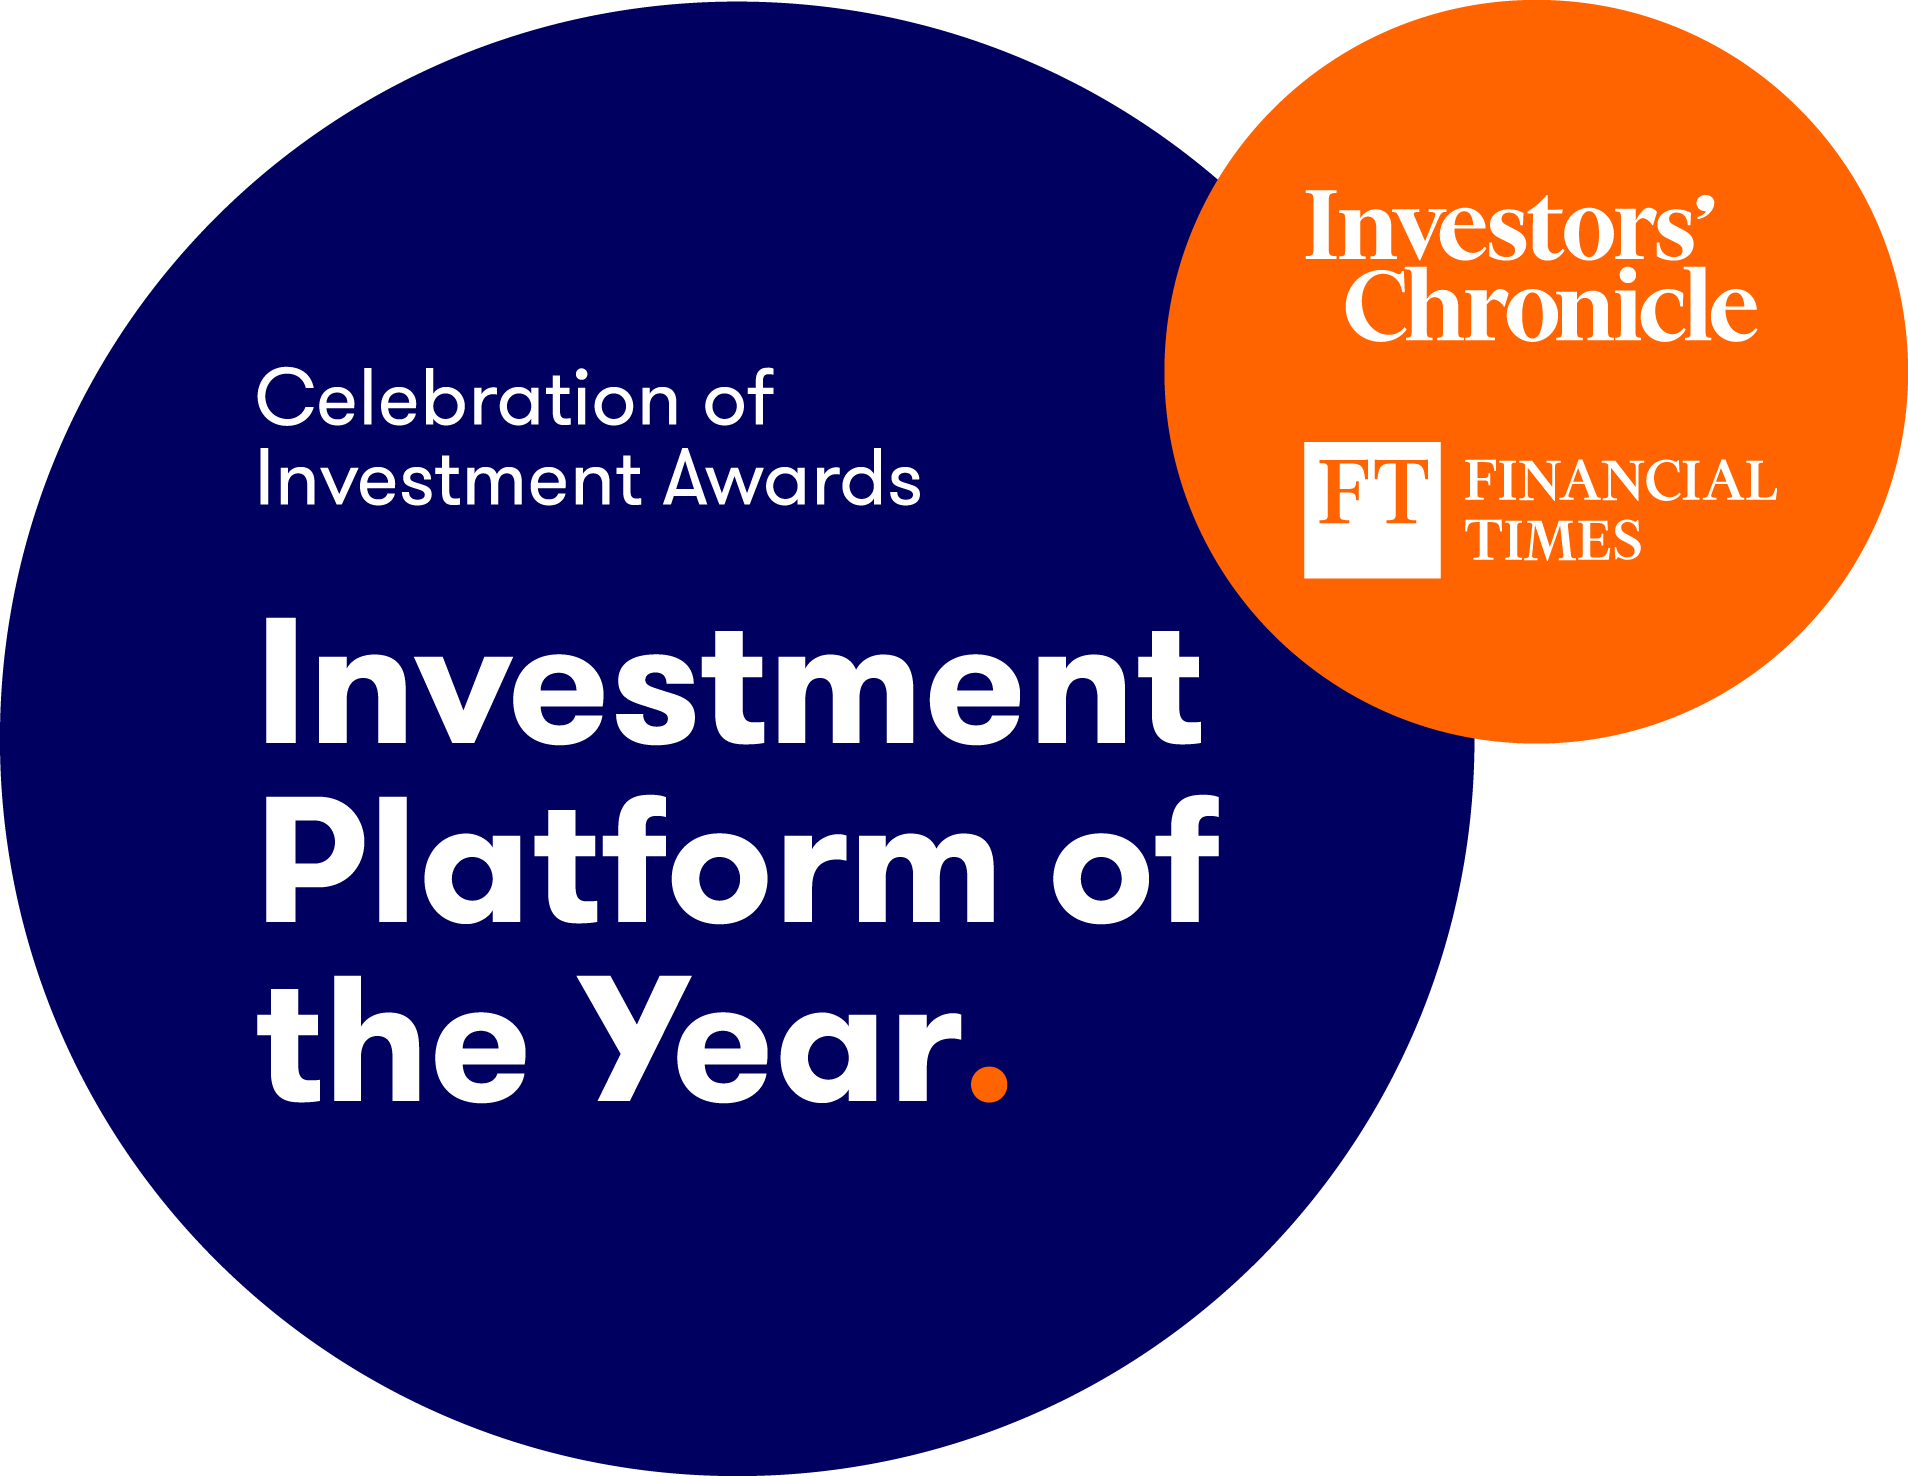 Investment Platform of the Year